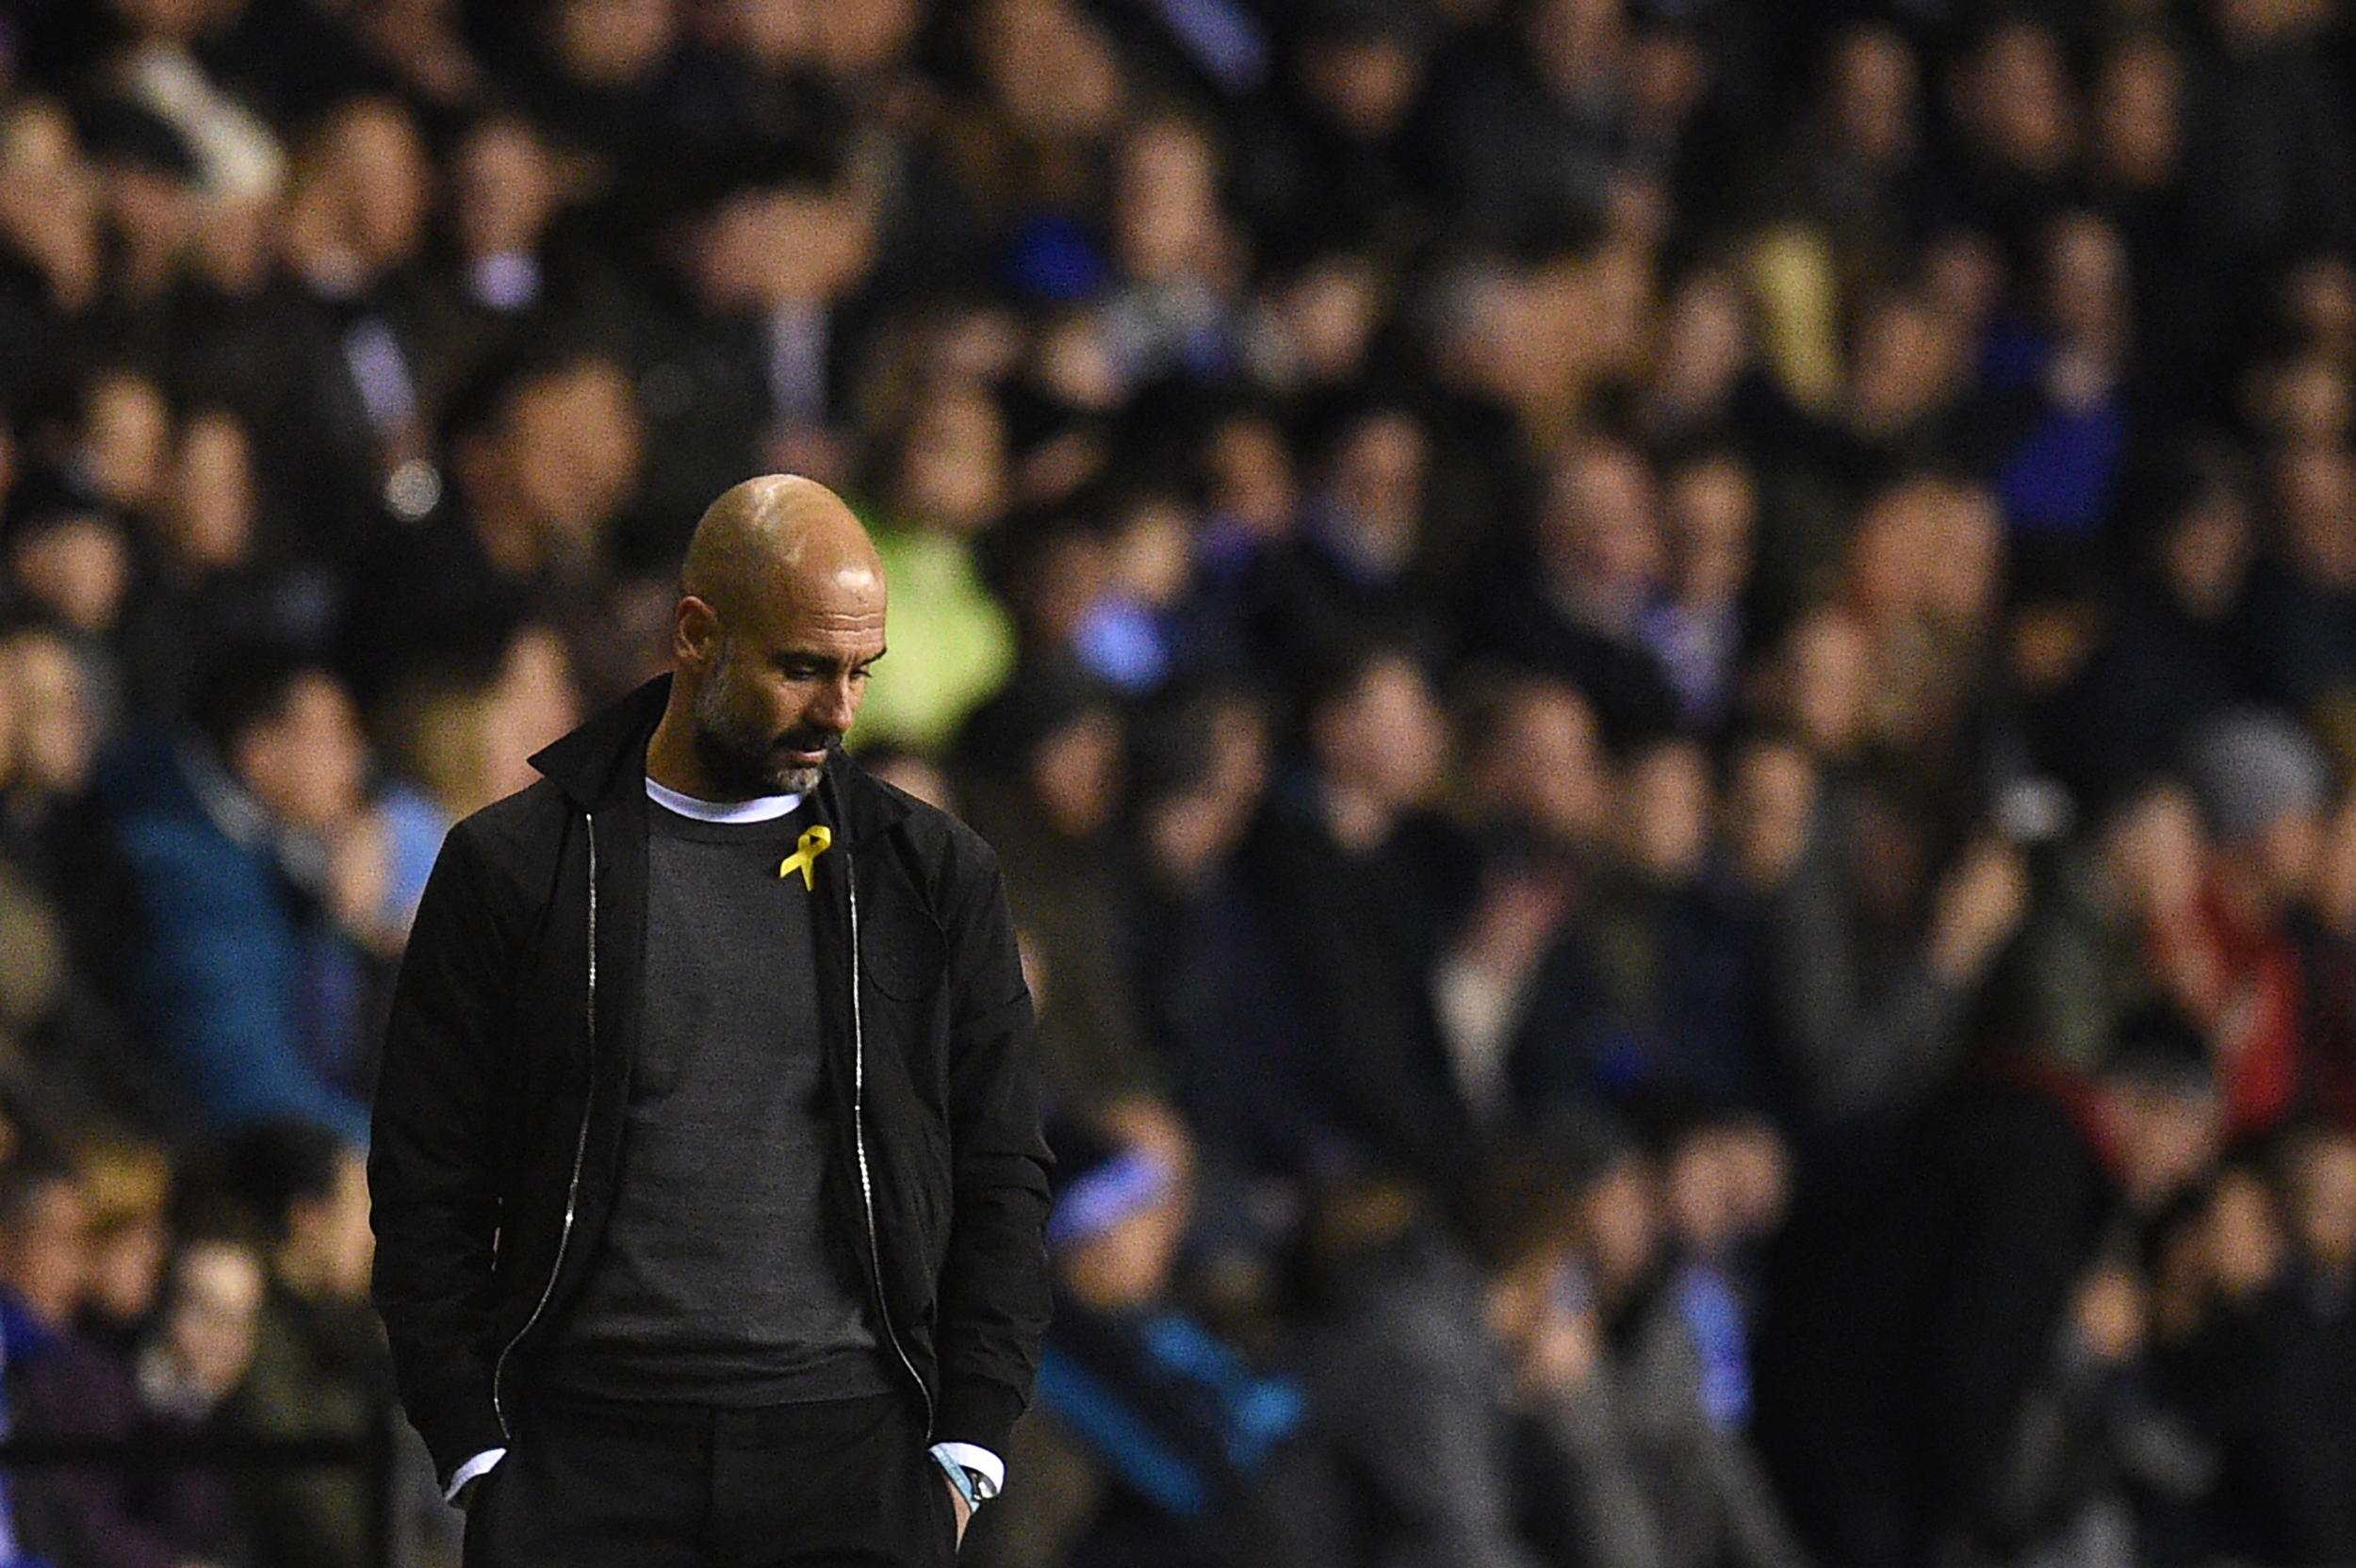 Pep Guardiola has been wearing a yellow ribbon on the touchline